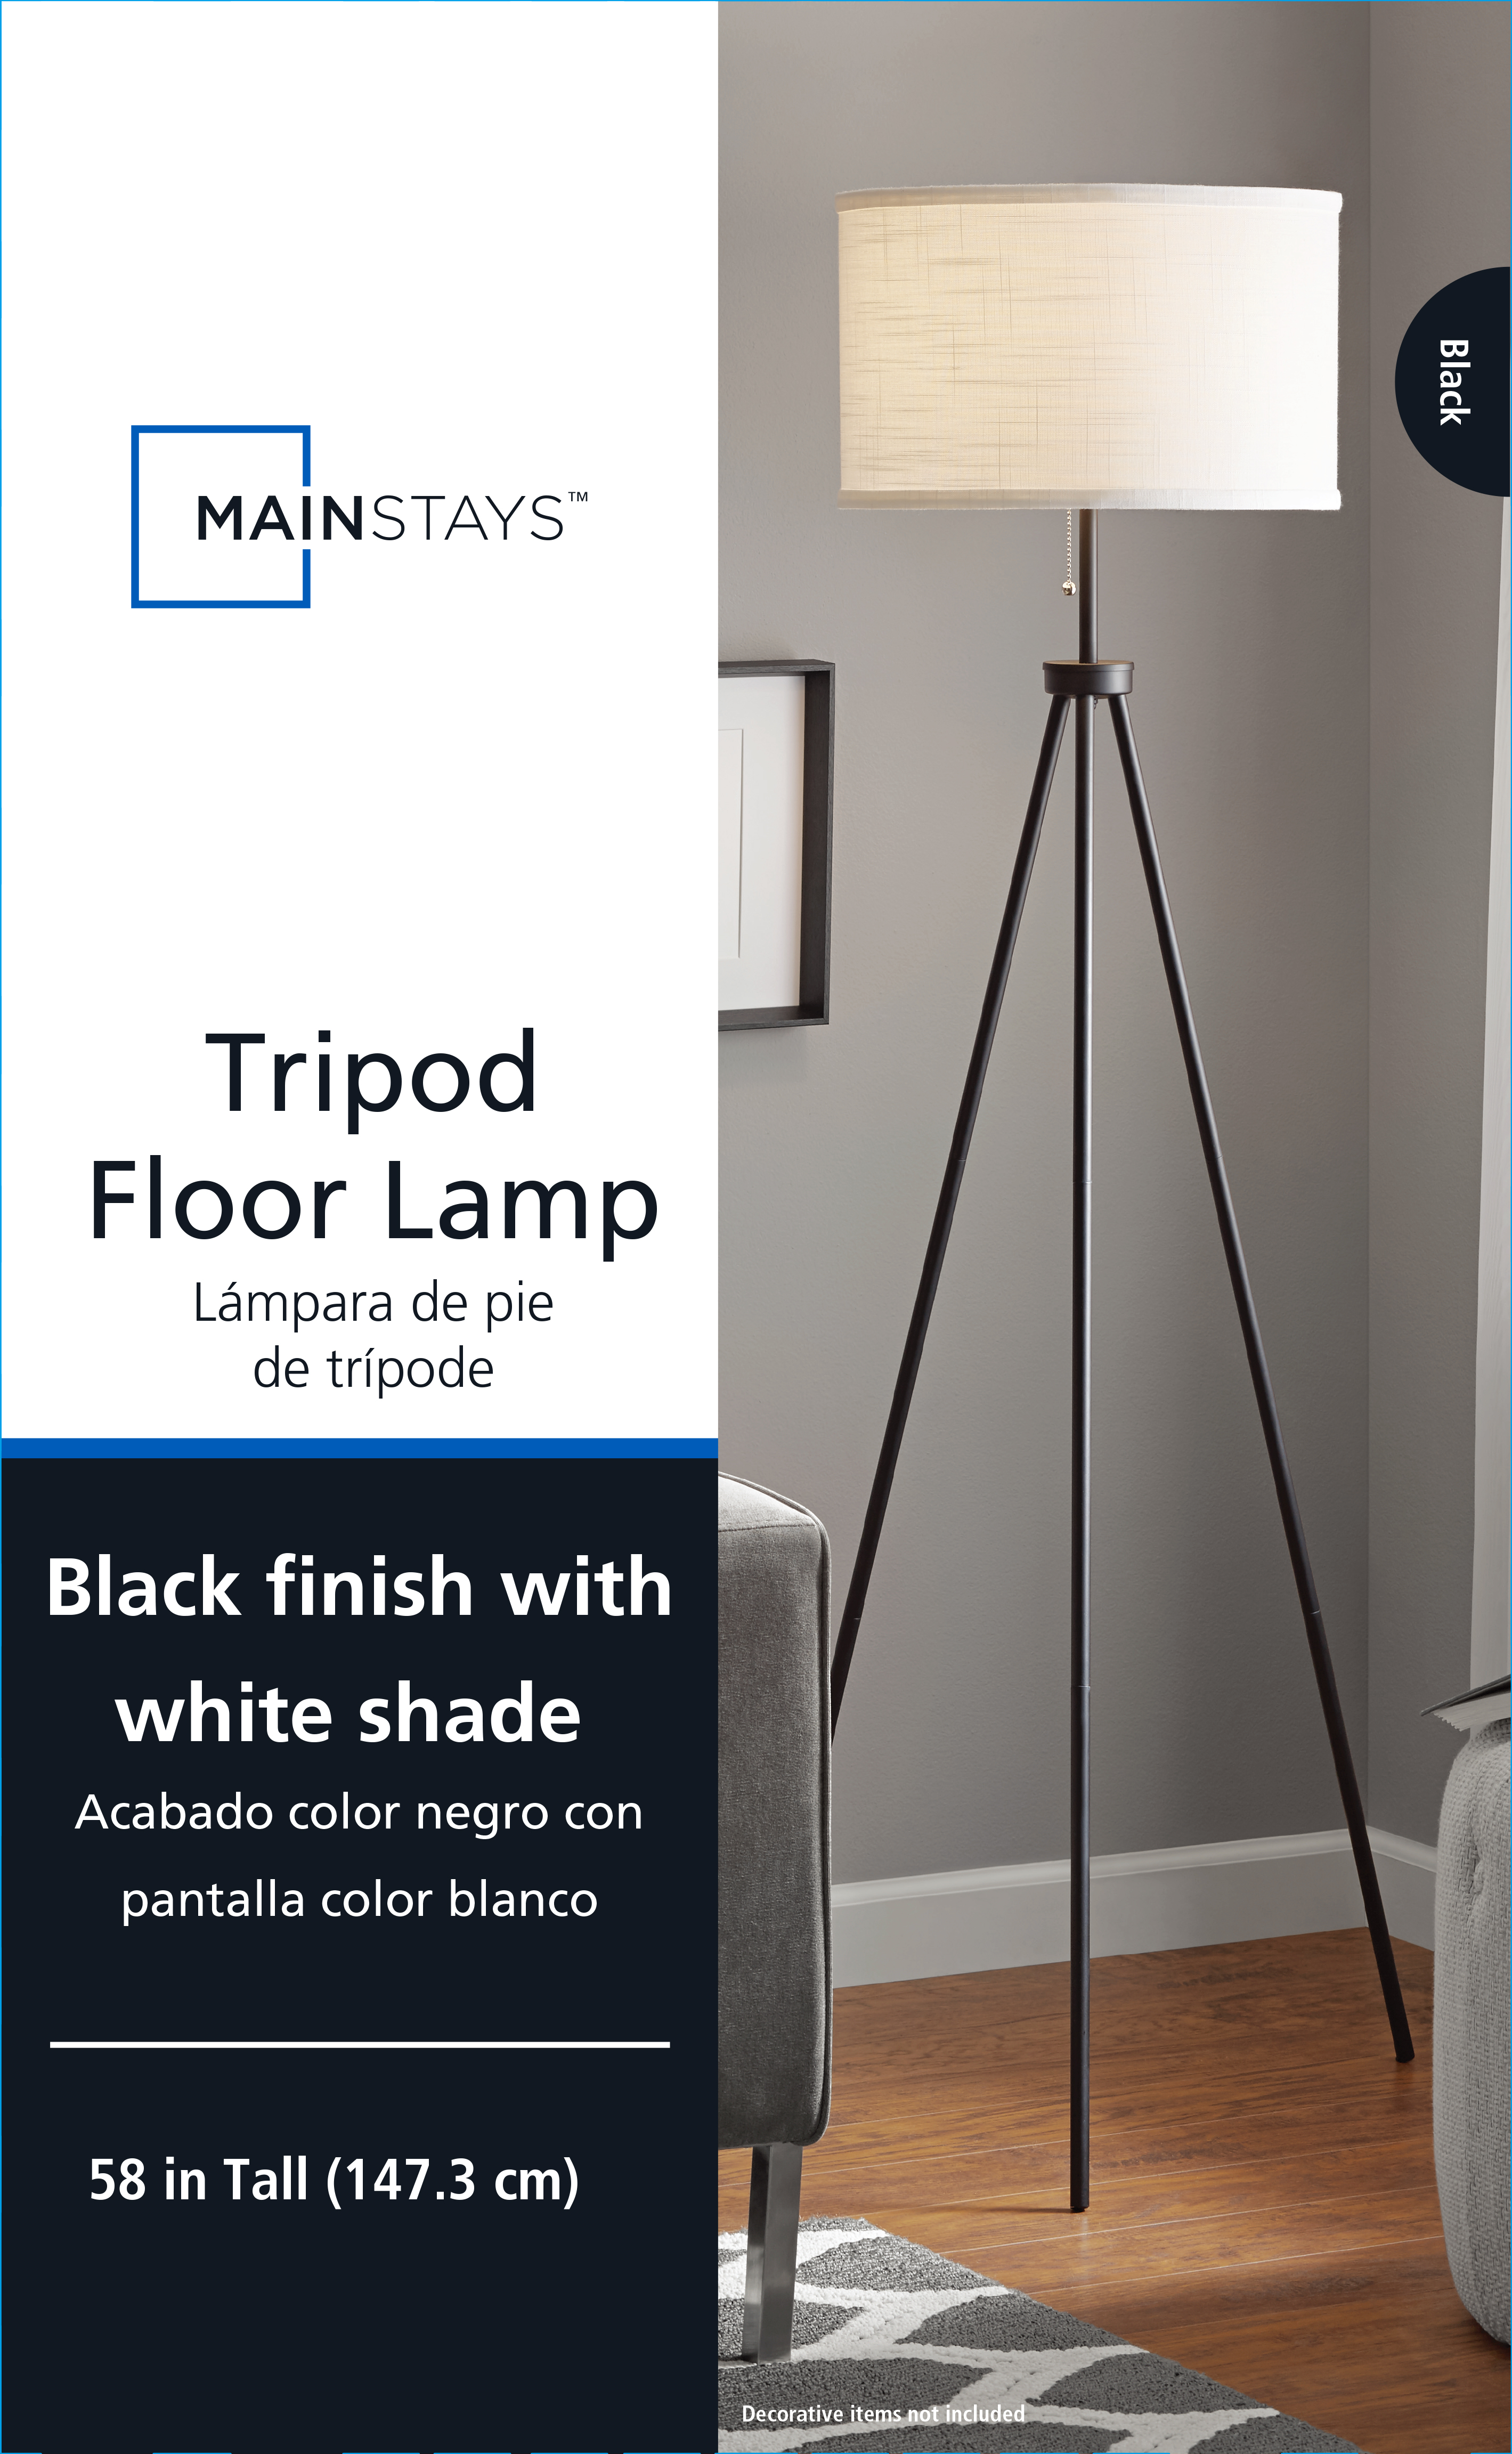 Mainstays 58" Black Metal Tripod Floor Lamp, Modern, Young Adult Dorms and Adult Home Office Use. - image 4 of 5